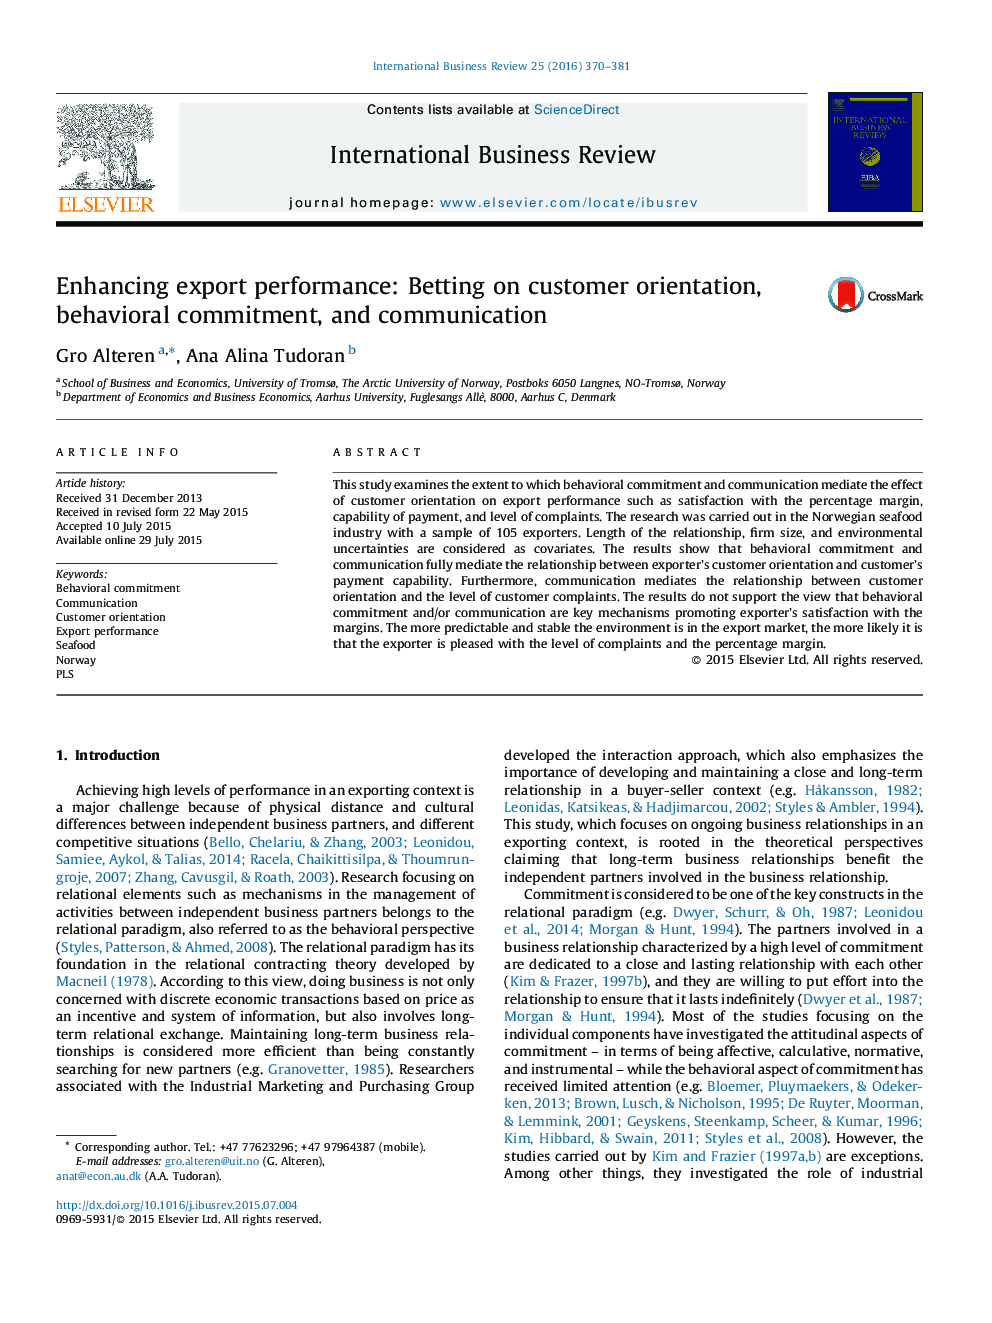 Enhancing export performance: Betting on customer orientation, behavioral commitment, and communication